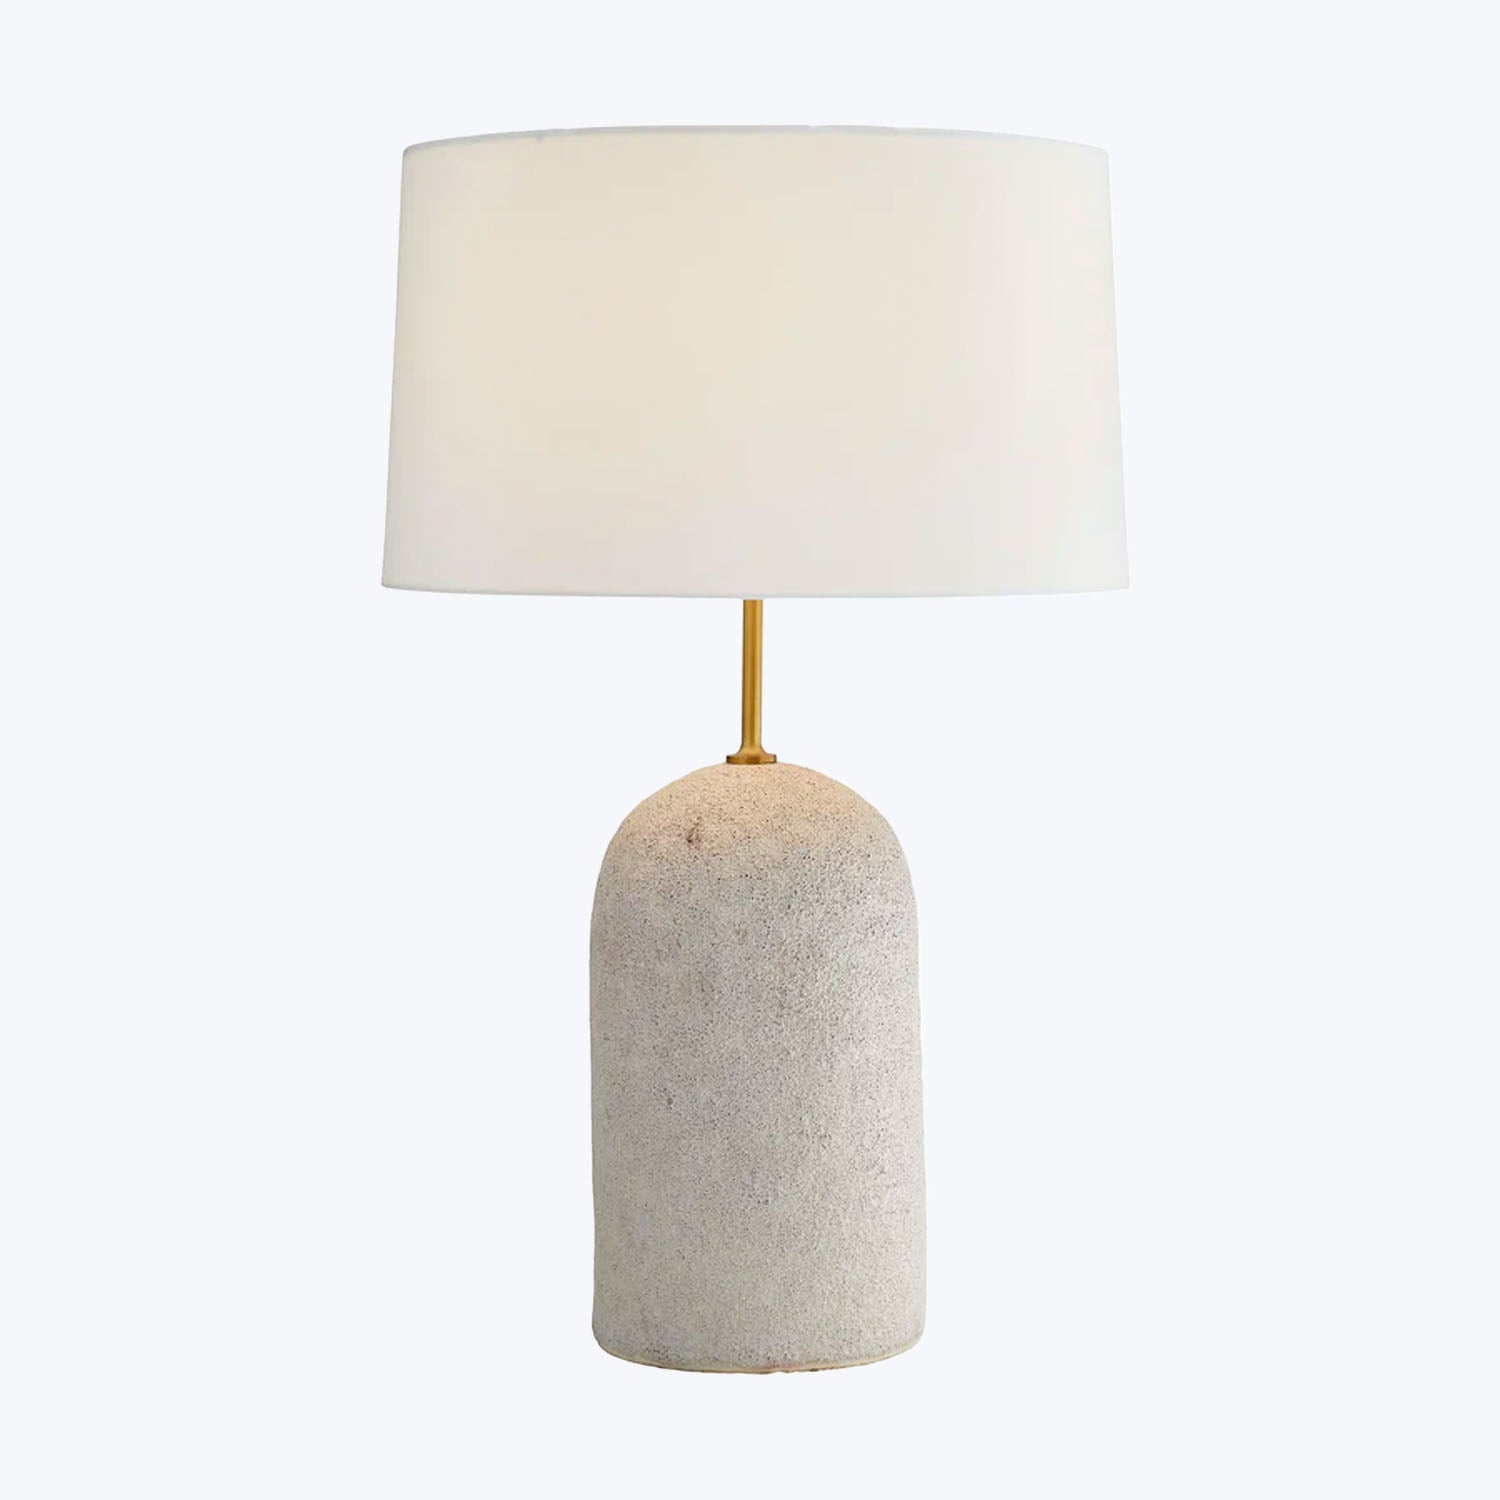 Contemporary table lamp with textured stone base and soft lighting.